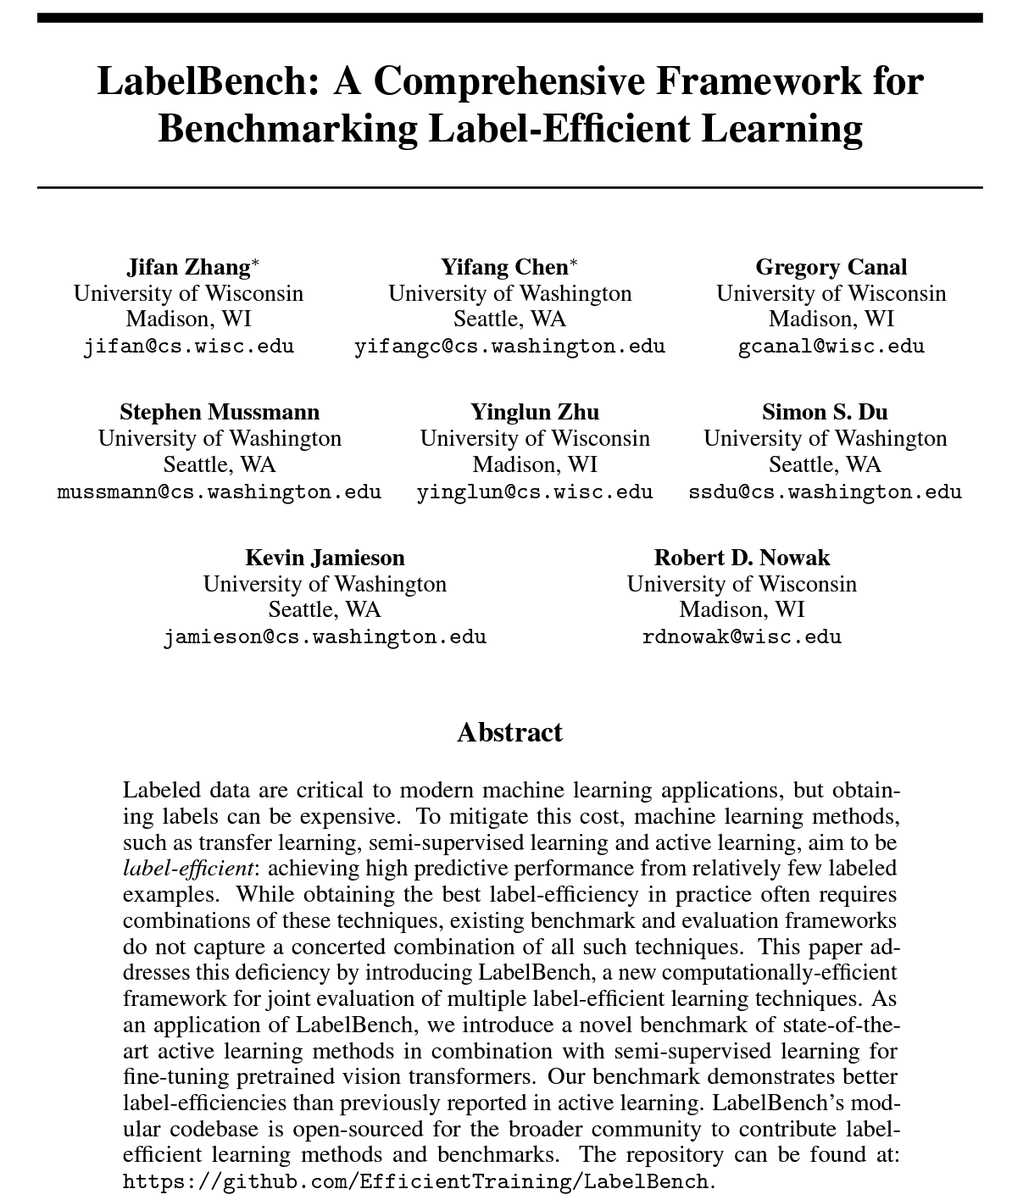 Introducing our framework and benchmarks for label-efficient learning. Evaluations of large pretrained models, Semi-SL and active learning have mostly stayed isolated. LabelBench combines all these mutually beneficial techniques to examine the best possible label-efficiency 1/